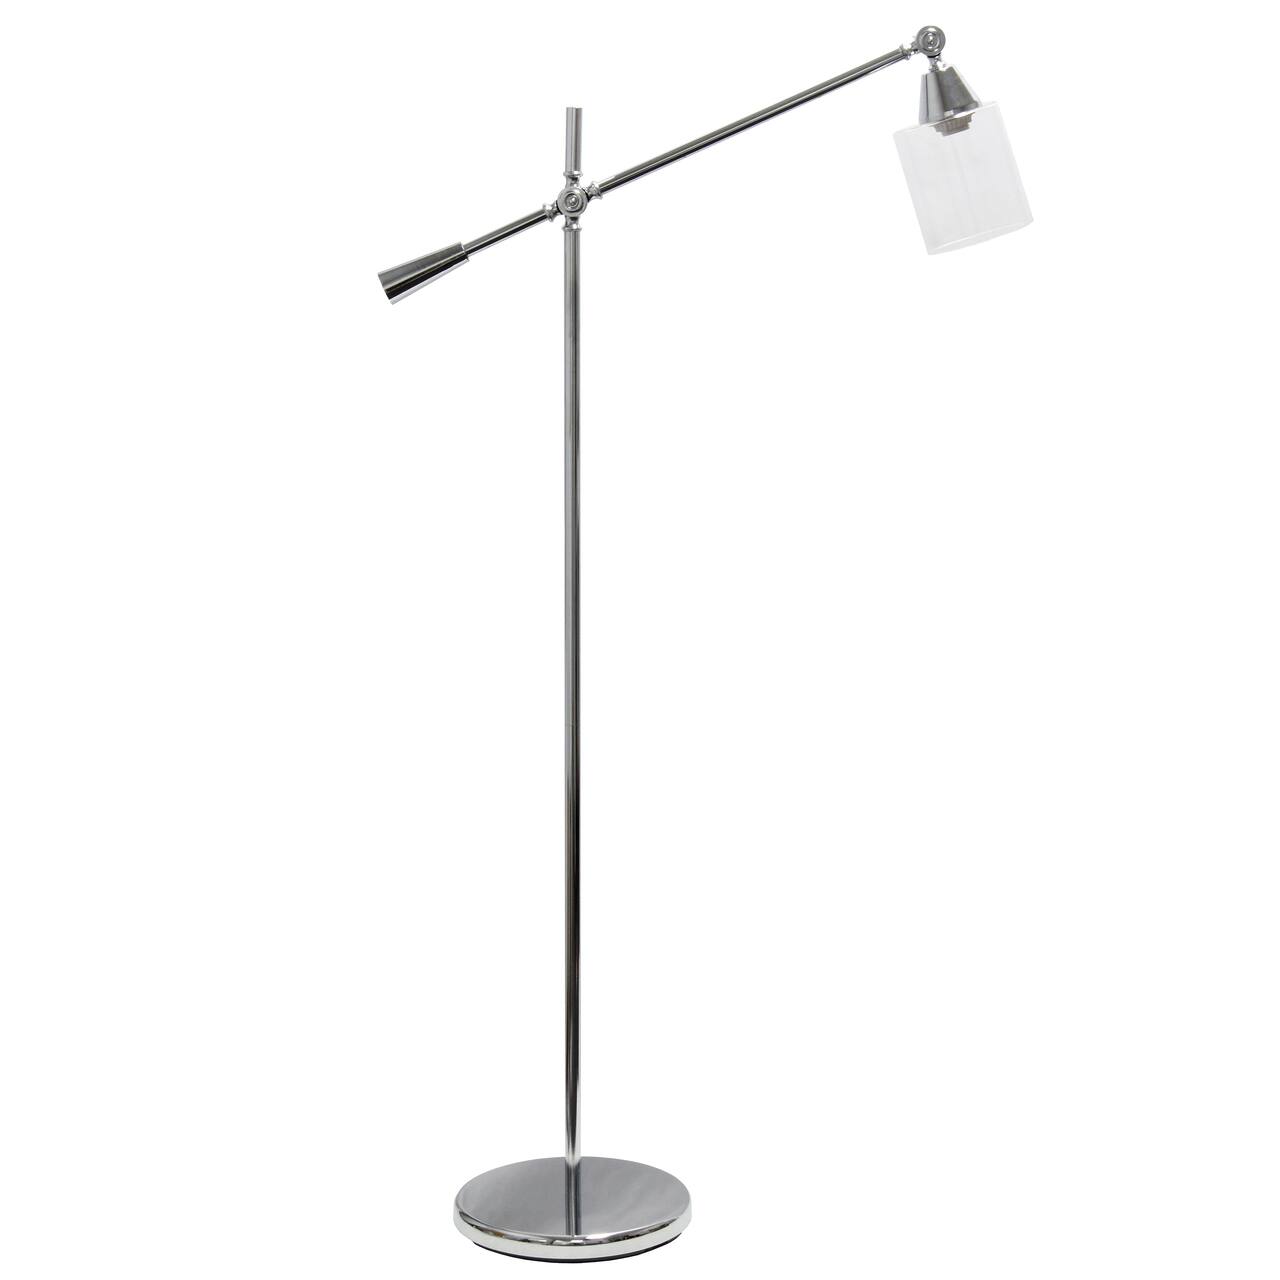 Lalia Home 4.6ft. Swing Arm Floor Lamp with Glass Cylindrical Shade